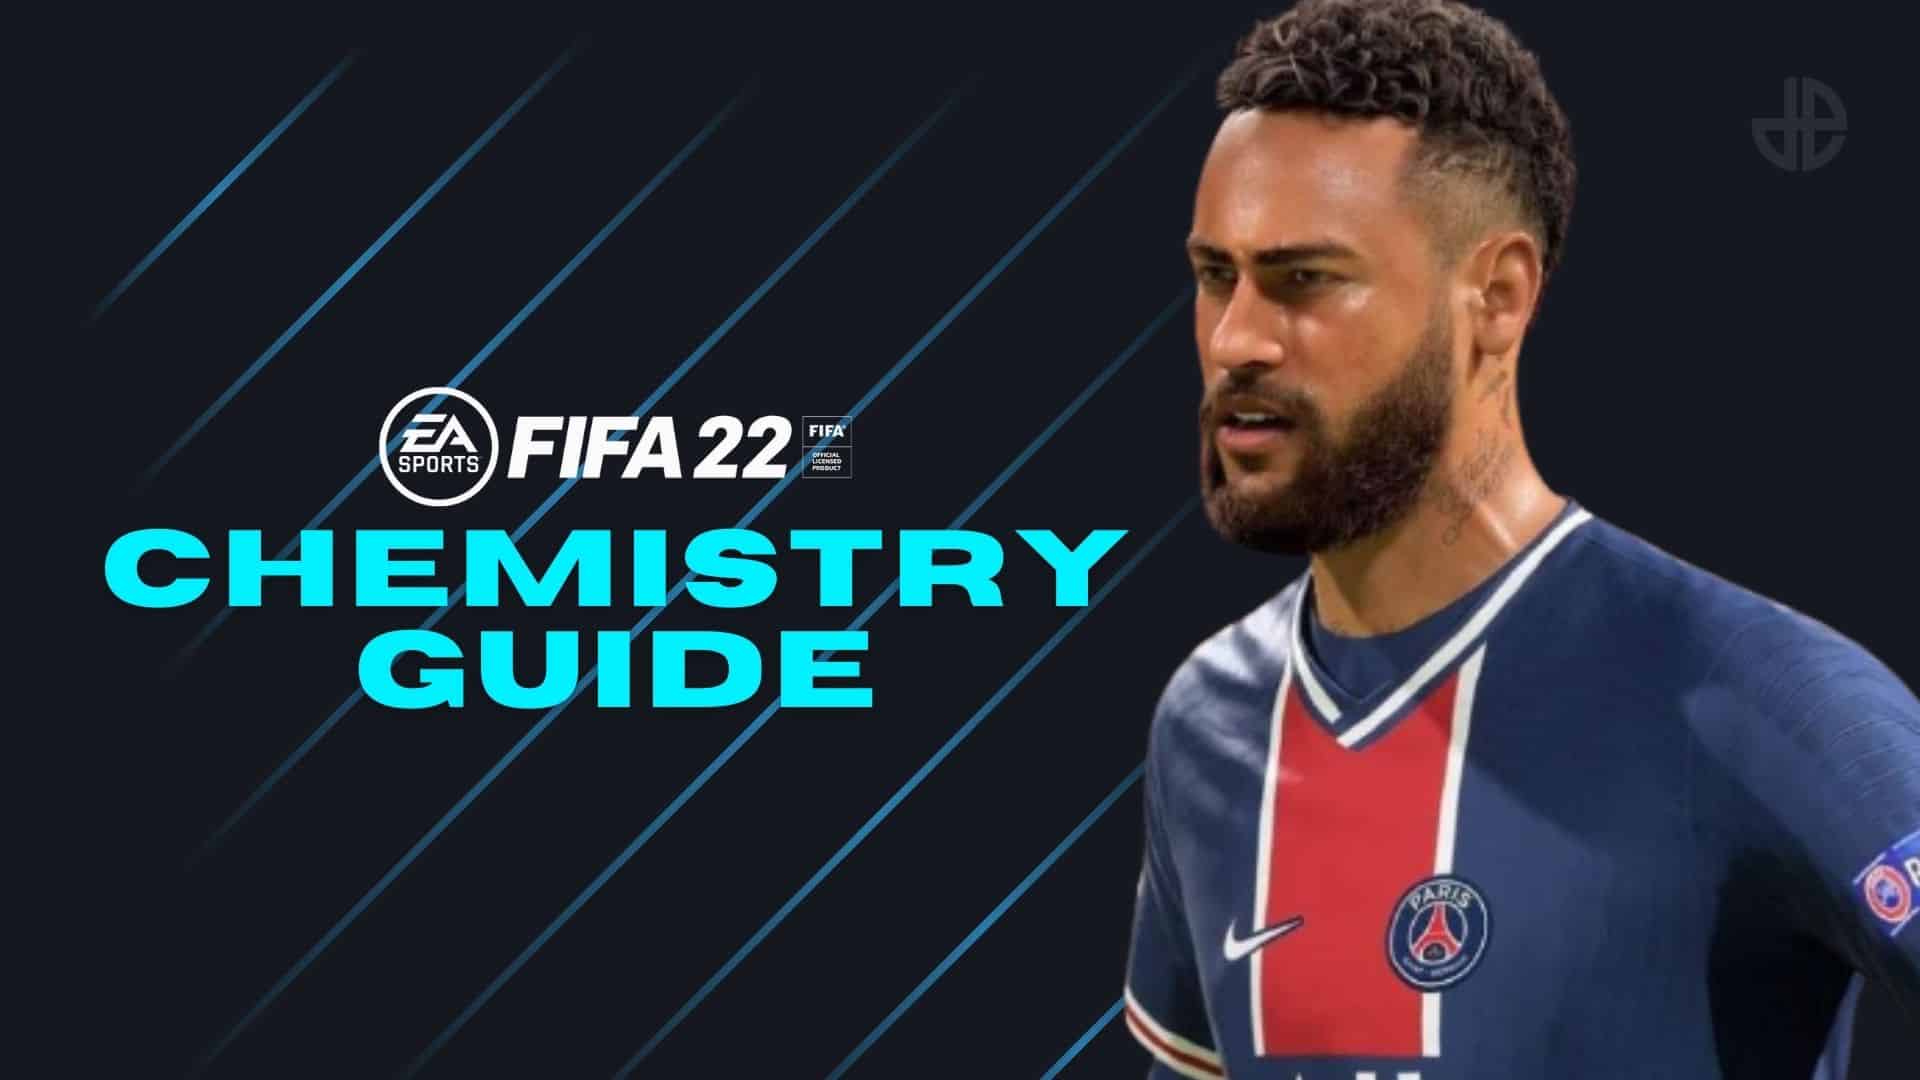 FIFA 22 CHEMISTRY GUIDE